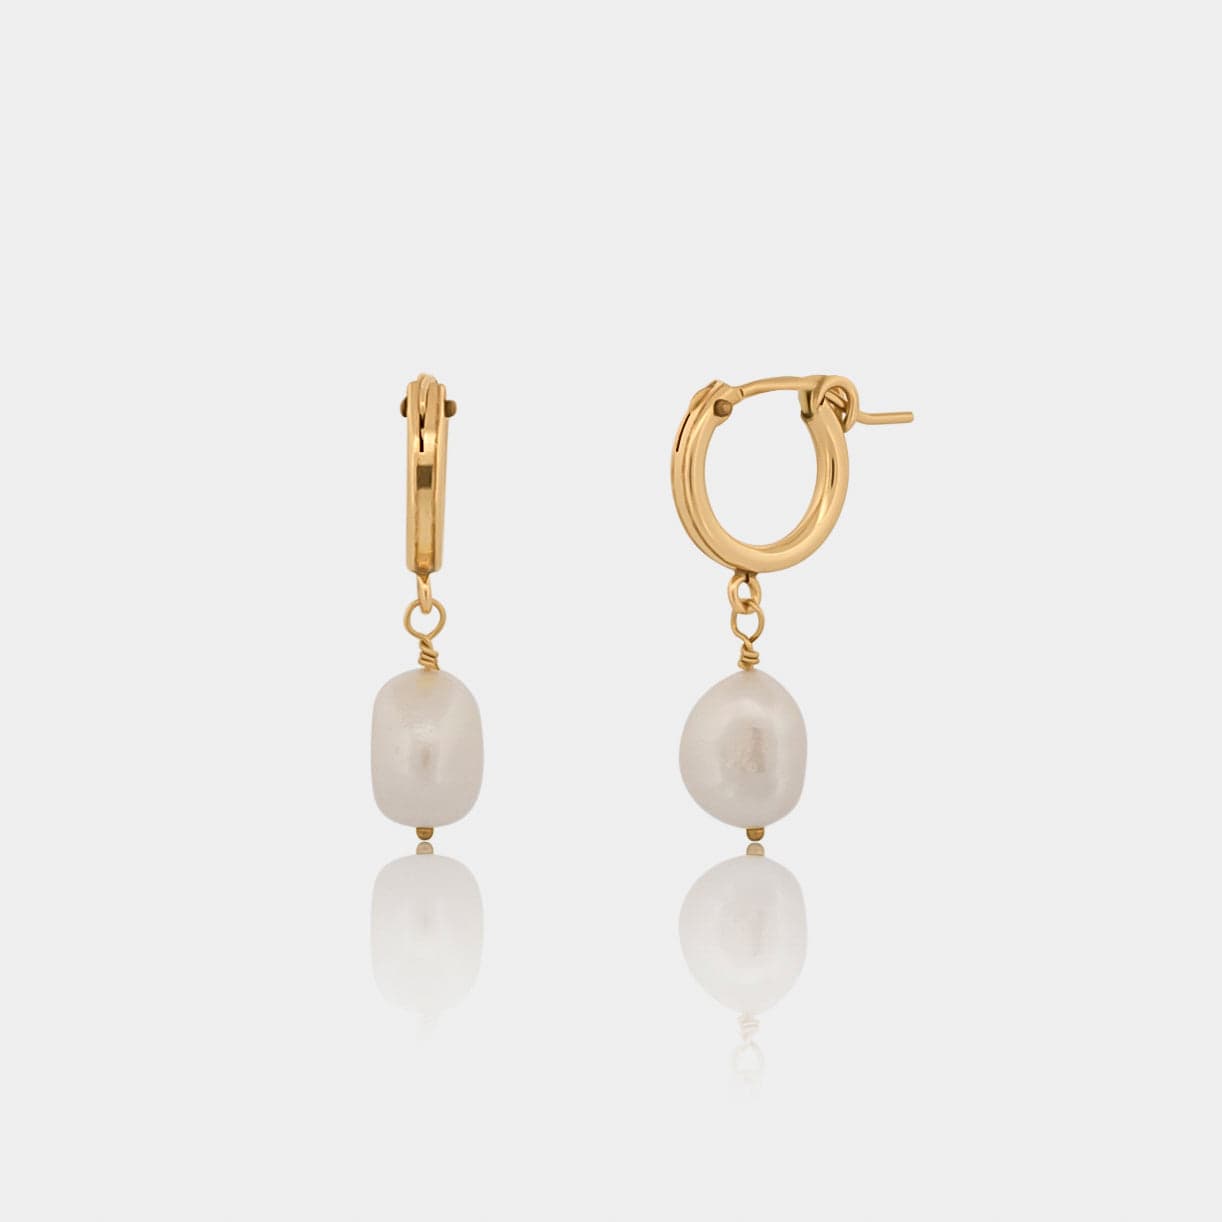 14K Gold Filled Earrings Pia Pearl Drop Hoops LINK'D THE LABEL